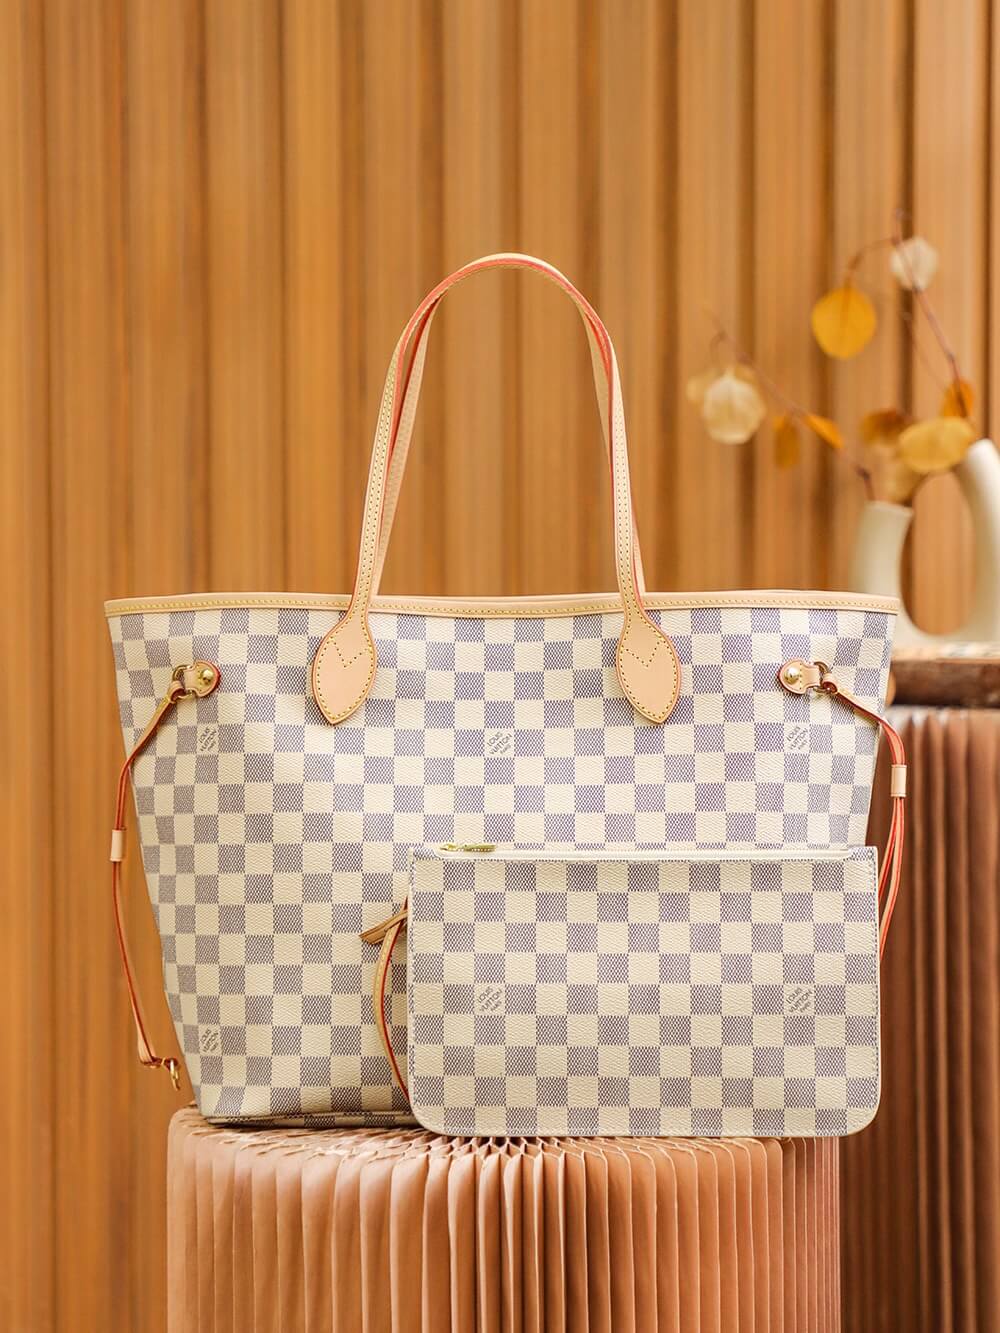 I PURCHASED A DESIGNER REPLICA  LOUIS VUITTON NEVERFULL MM